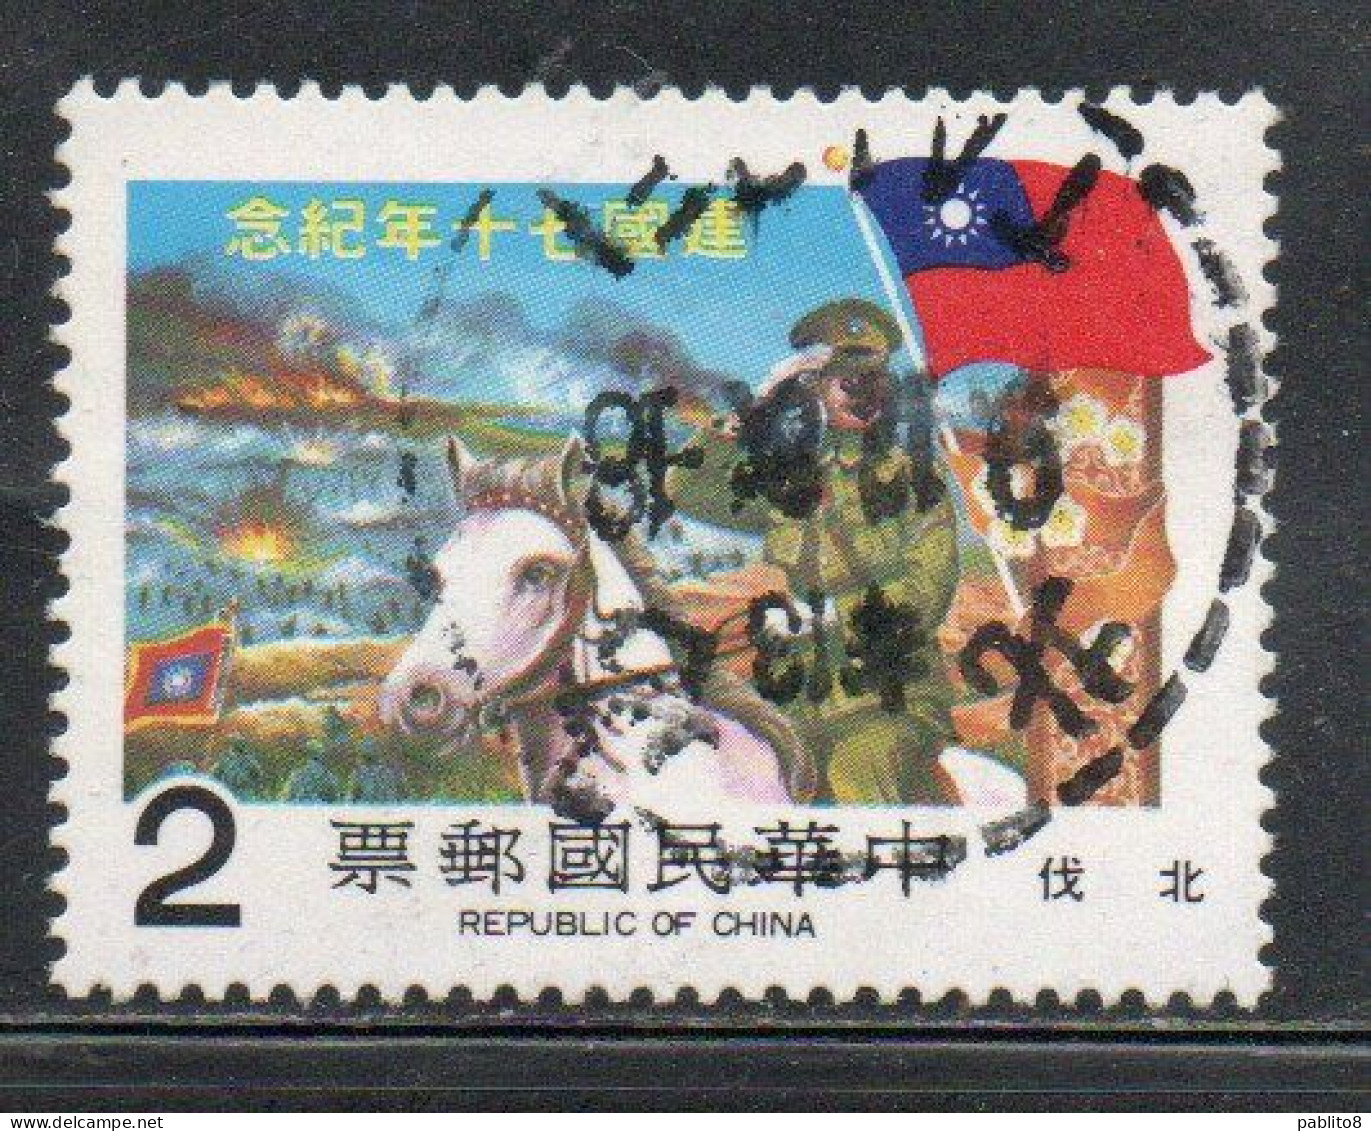 CHINA REPUBLIC CINA TAIWAN FORMOSA 1981 ANNIVERSARY REPUBLIC NORTHWARD EXPEDITION CHIANG ON HORSE 2$ USED USATO OBLITERE - Oblitérés